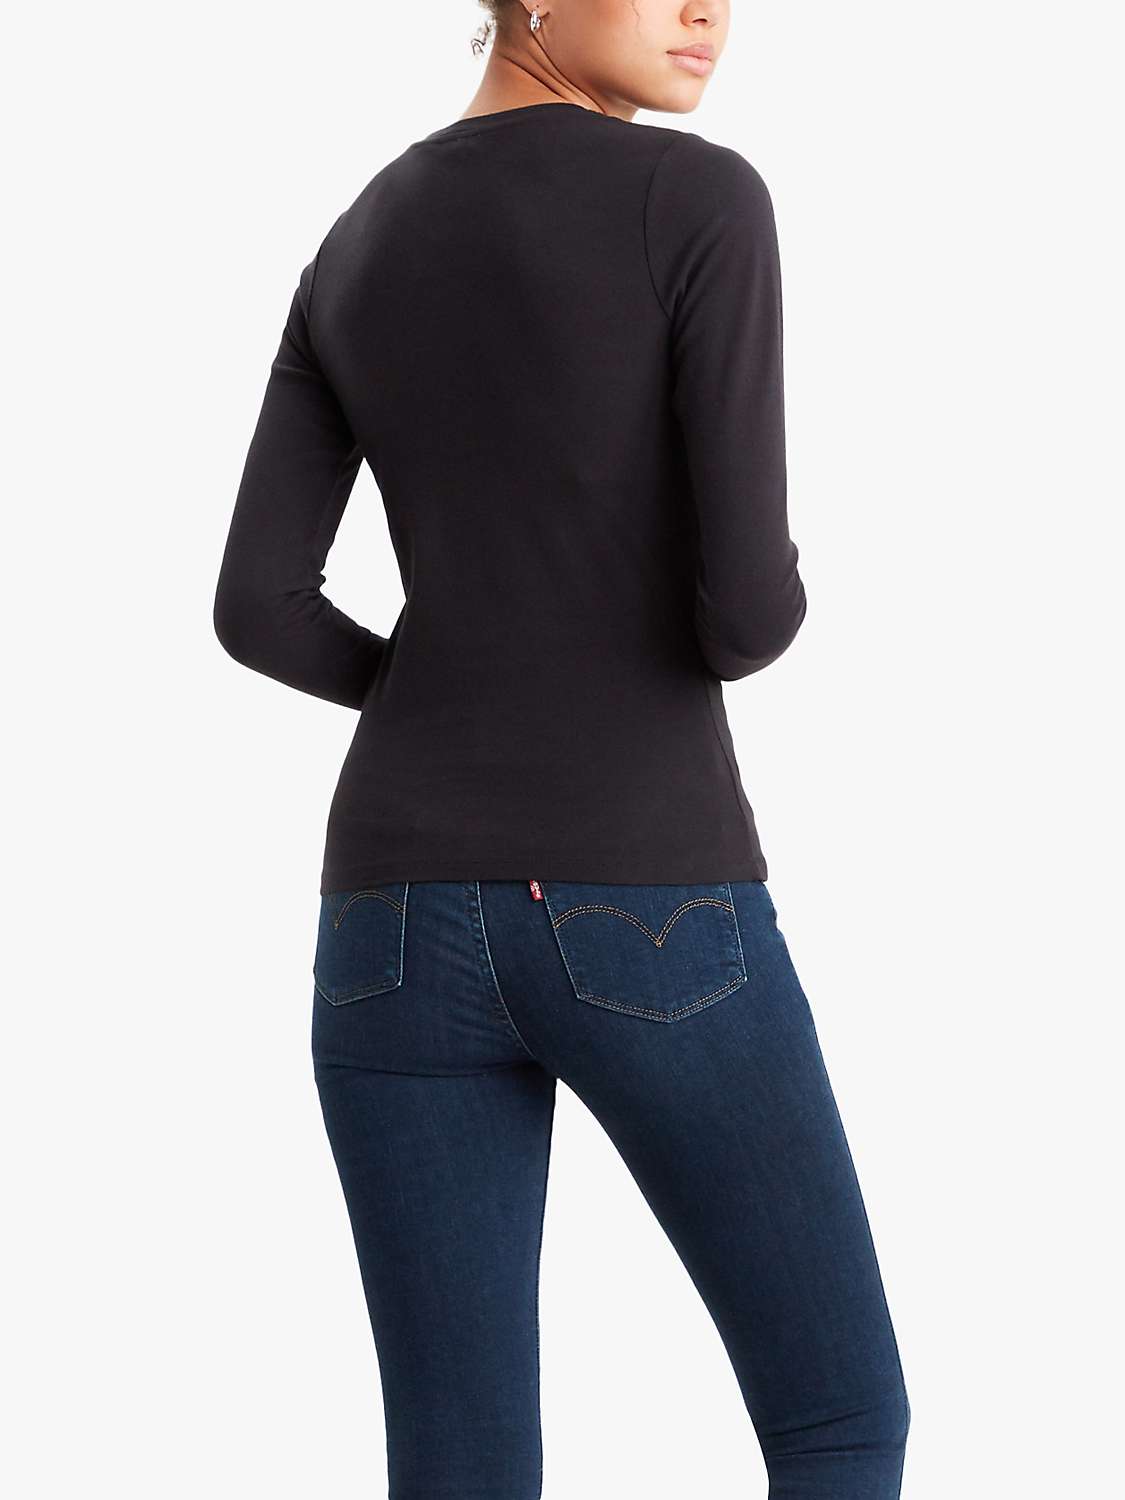 Buy Levi's Baby Plain Long Sleeve Jersey Top Online at johnlewis.com